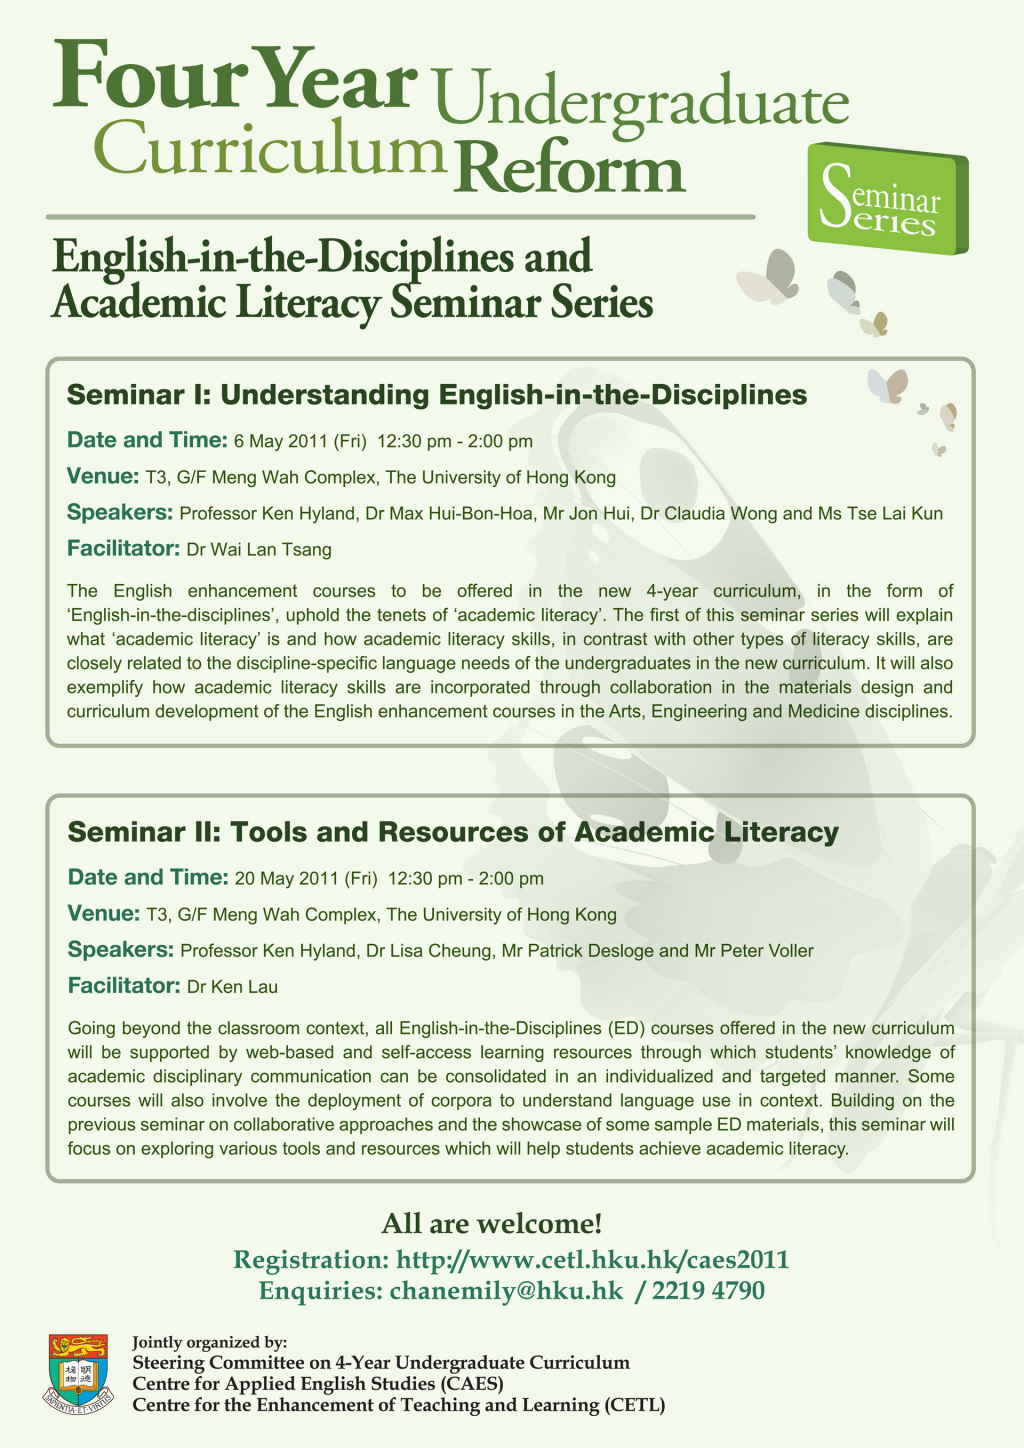 English-in-the-Disciplines and Academic Literacy Seminar Series